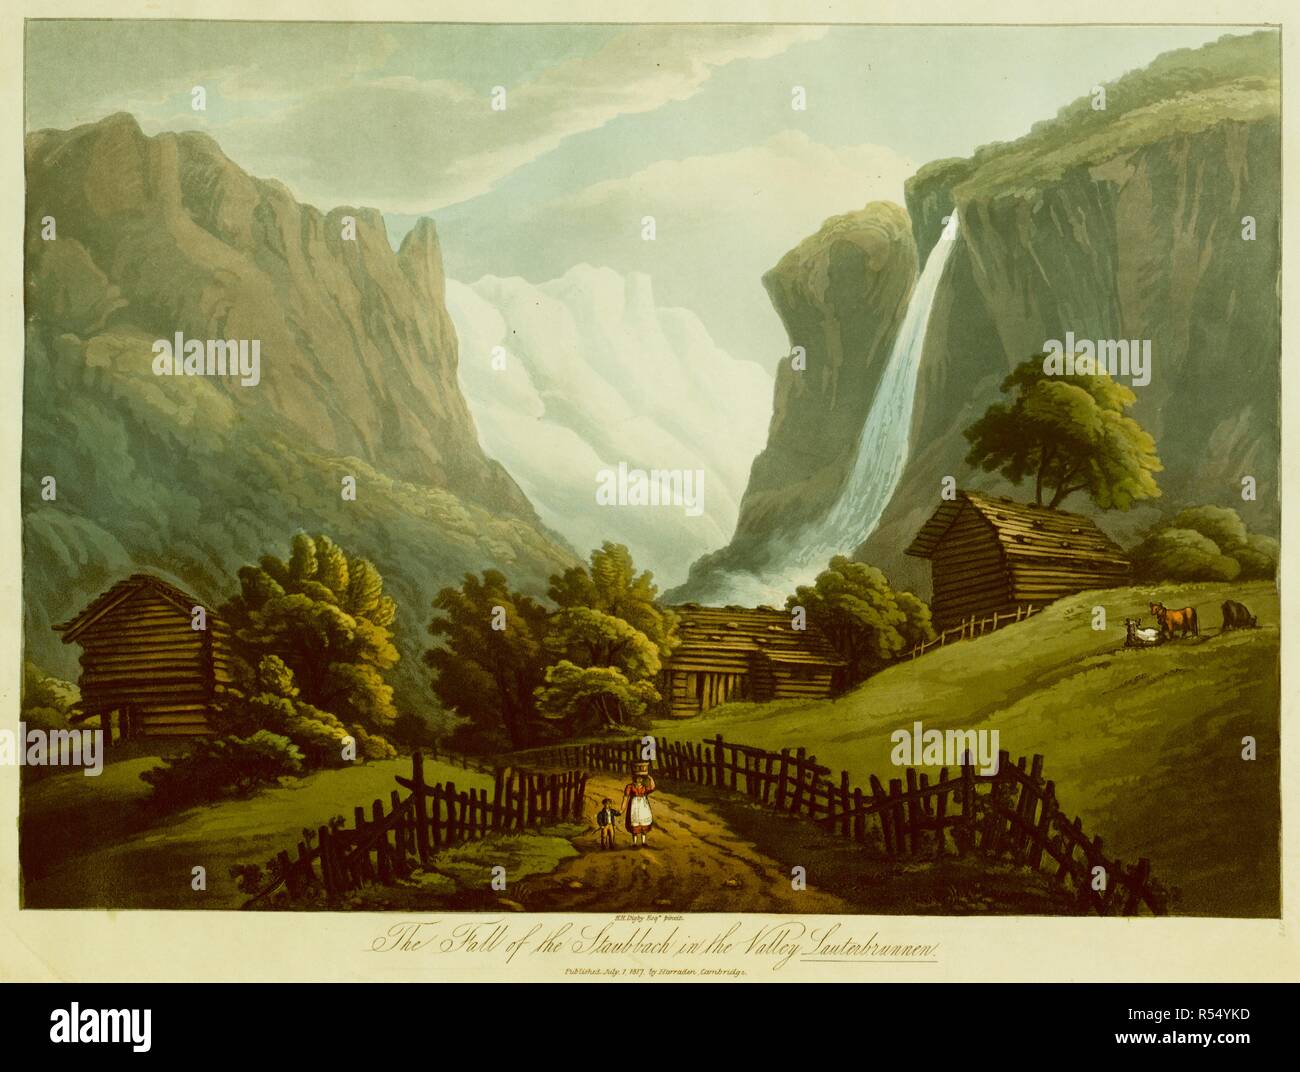 A woman carrying a pail of milk on her head and a small boy by her side, walk down a road with wooden fences on both sides in the foreground. Wooden cabins and cattle grazing on the meadows beyond, and a view of the Staubbach Falls and the Lauterbrunnen Valley in the background . The Fall of the Staubbach in the Valley Lauterbrunnen. [Cambridge] : Published July 1 1817. by Harraden, Cambridge, [July 1 1817]. Hand-coloured aquatint and etching. Source: Maps K.Top.85.65.2.b. Language: English. Stock Photo